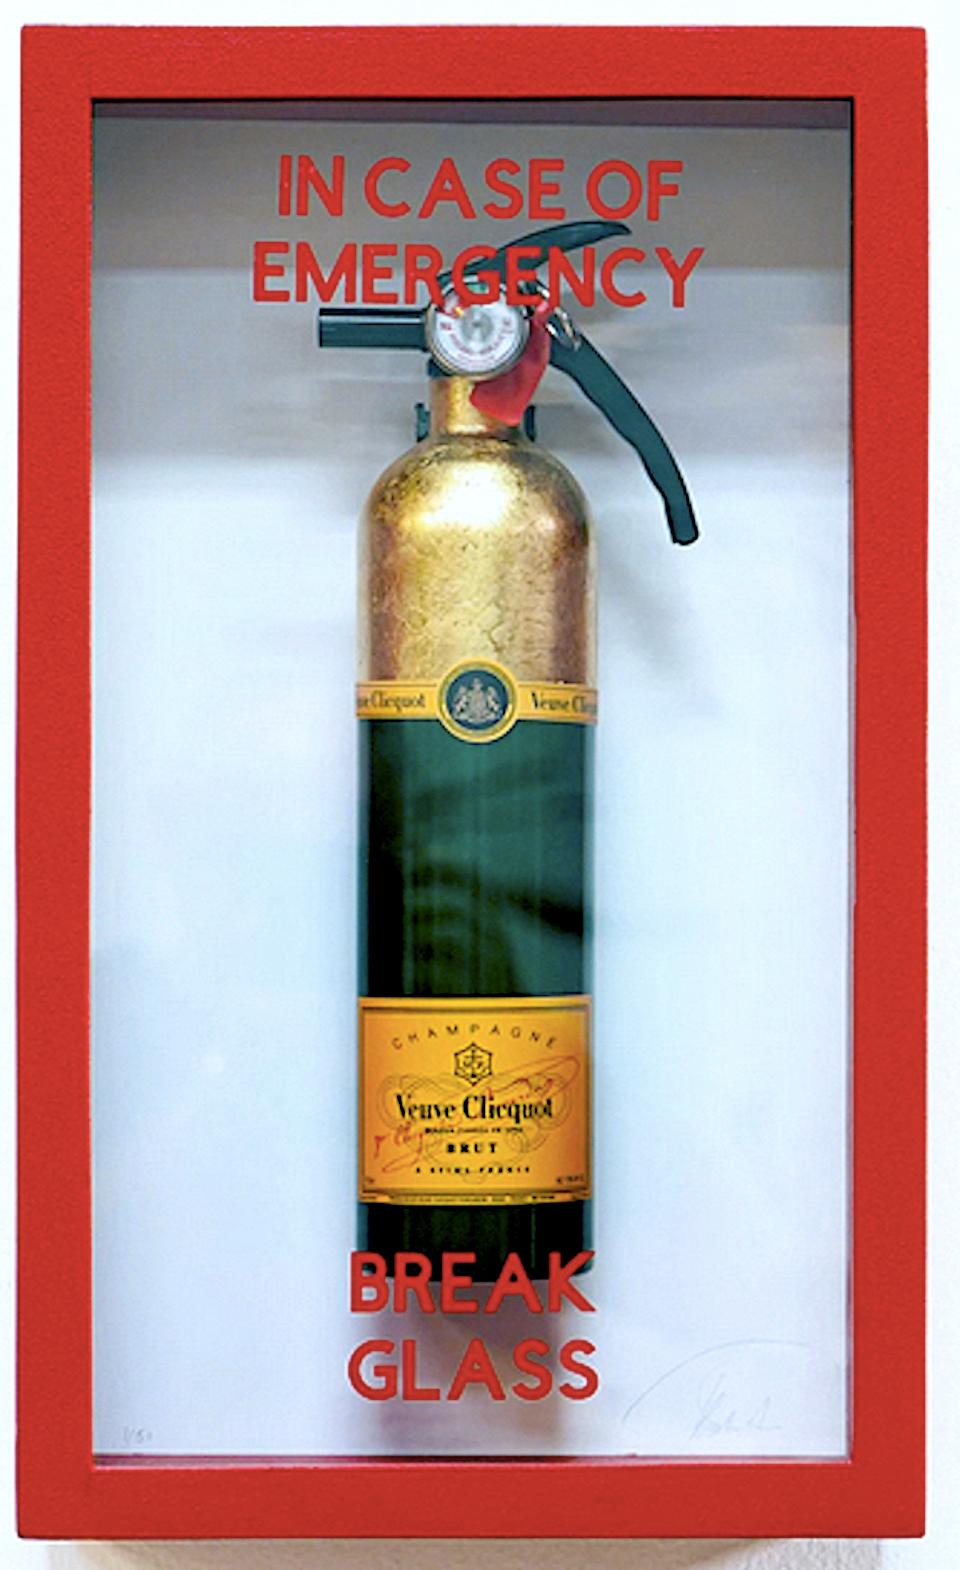 "In Case Of Emergency - Vueve Midi Fire Extinguisher" - Mixed Media Art by Plastic Jesus